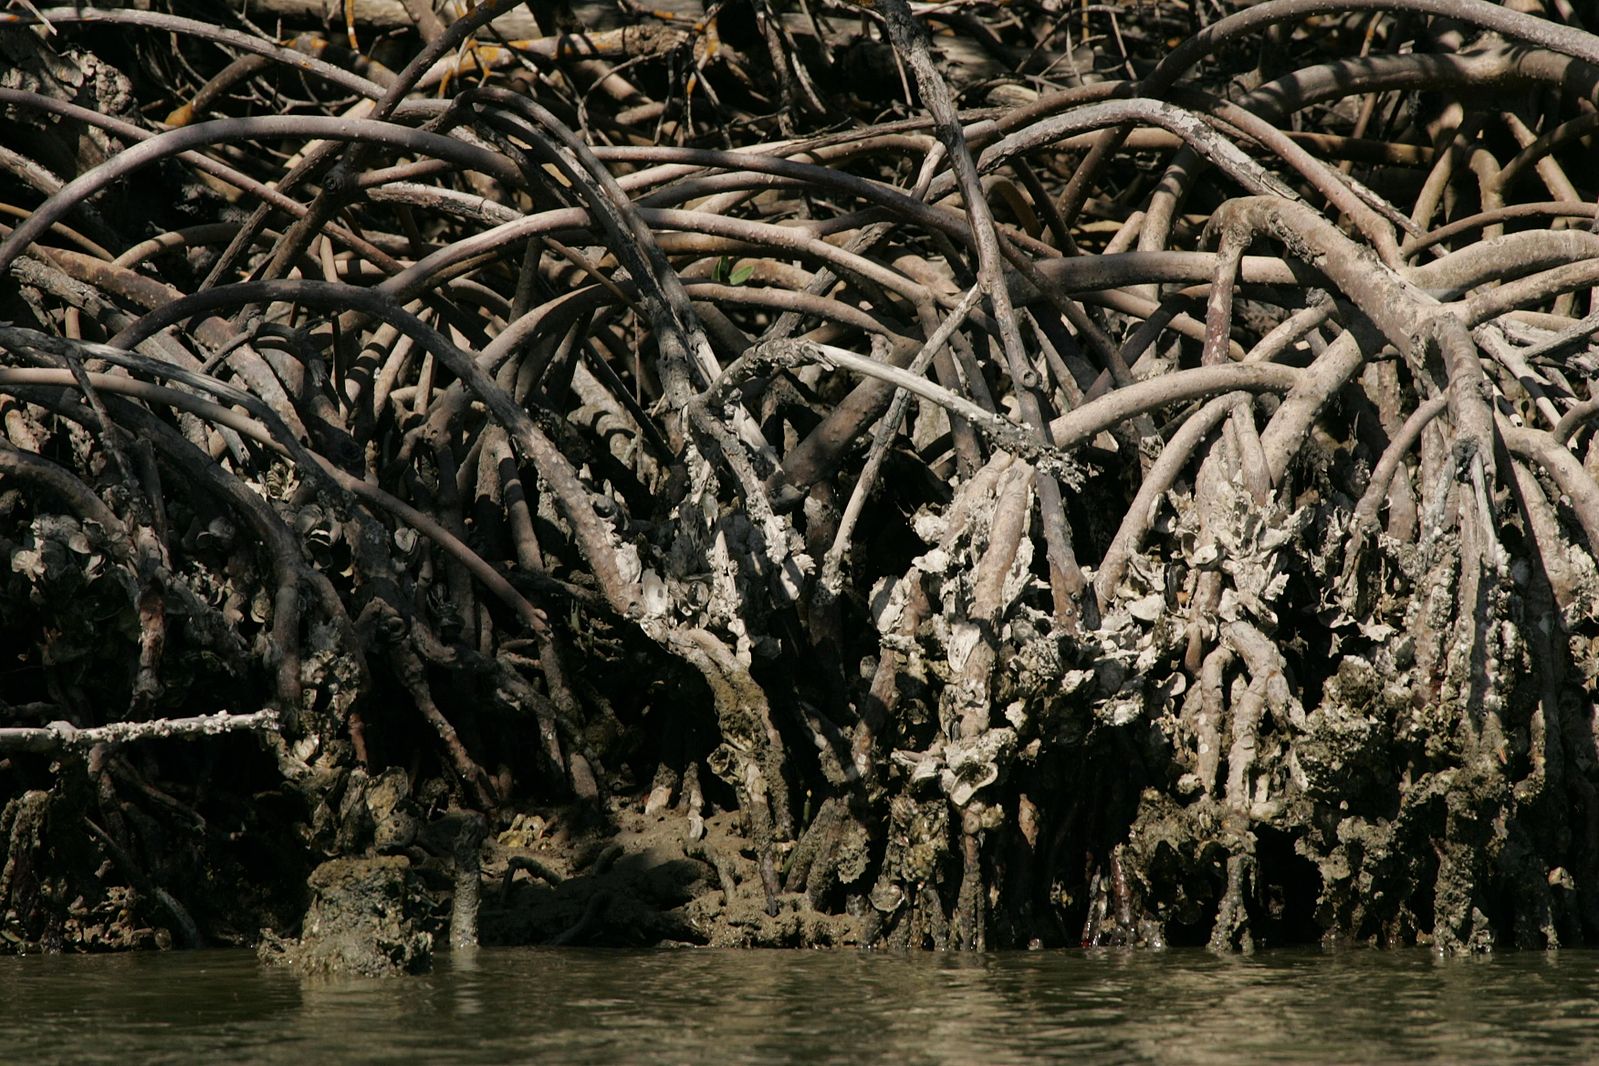 A close up of the root system of a red mangrove tree.